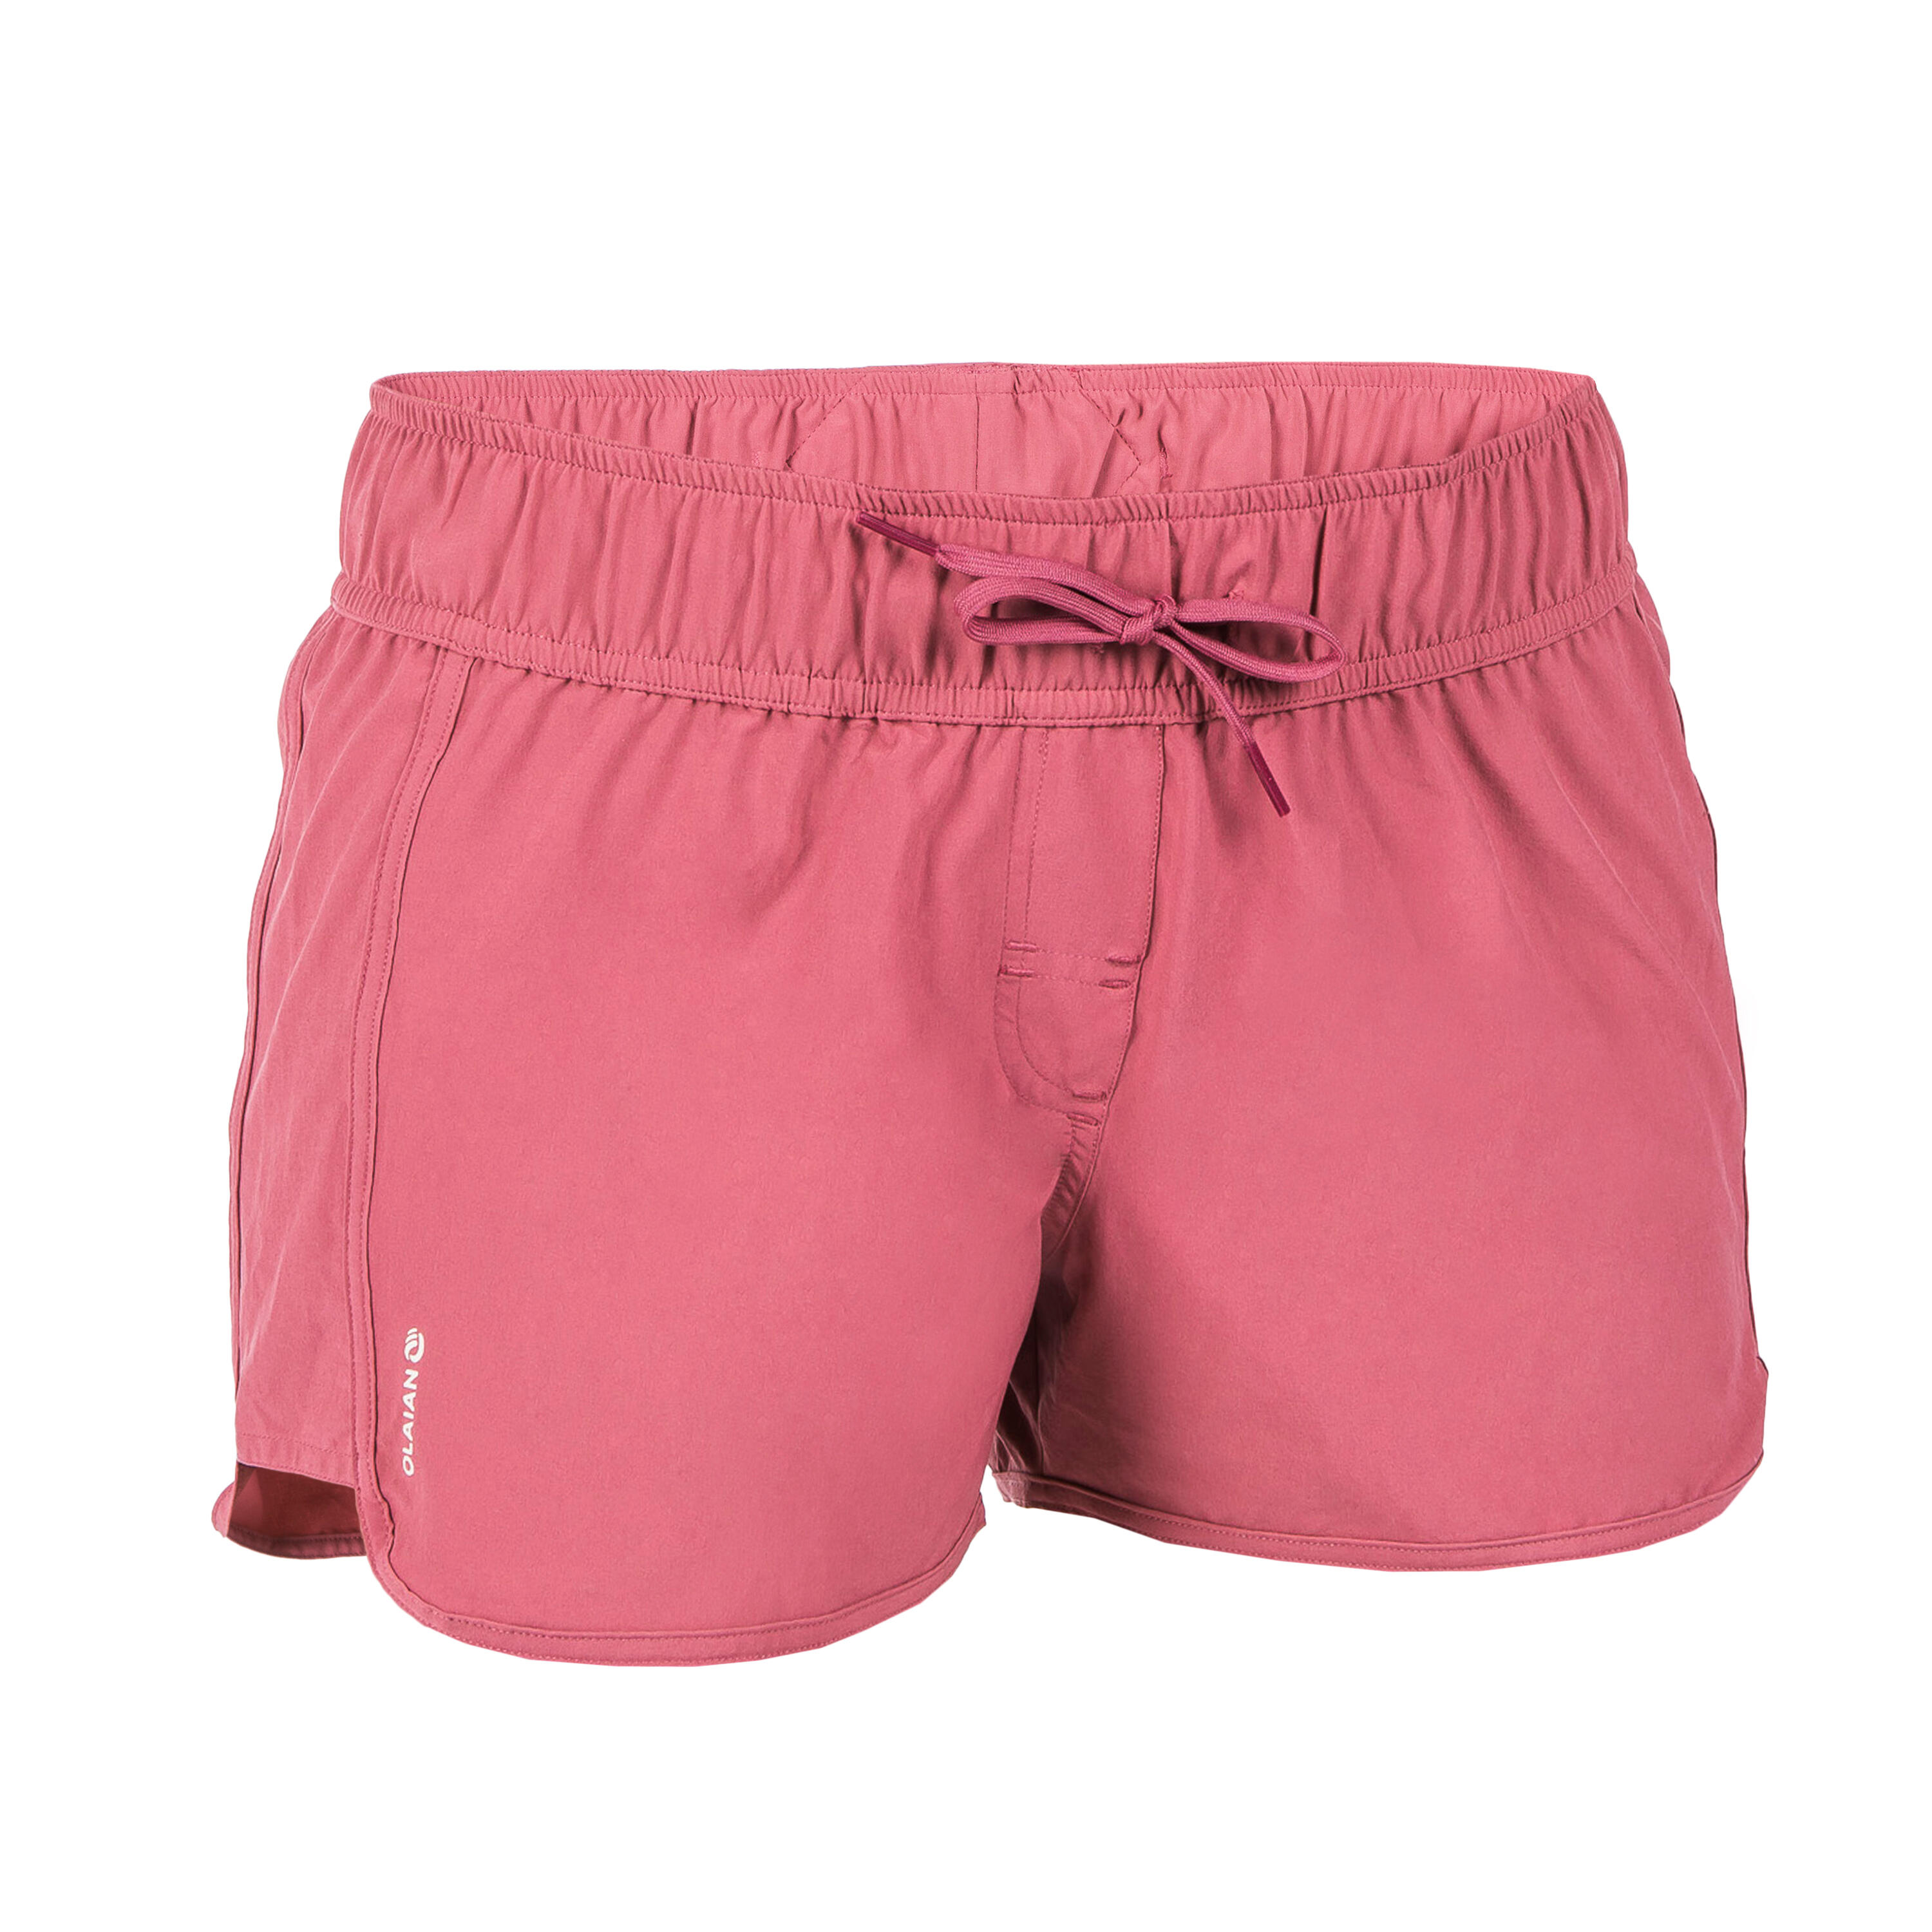 Women's Surfing Boardshorts with Elasticated Waistband and Drawstring TINI PINK 3/12